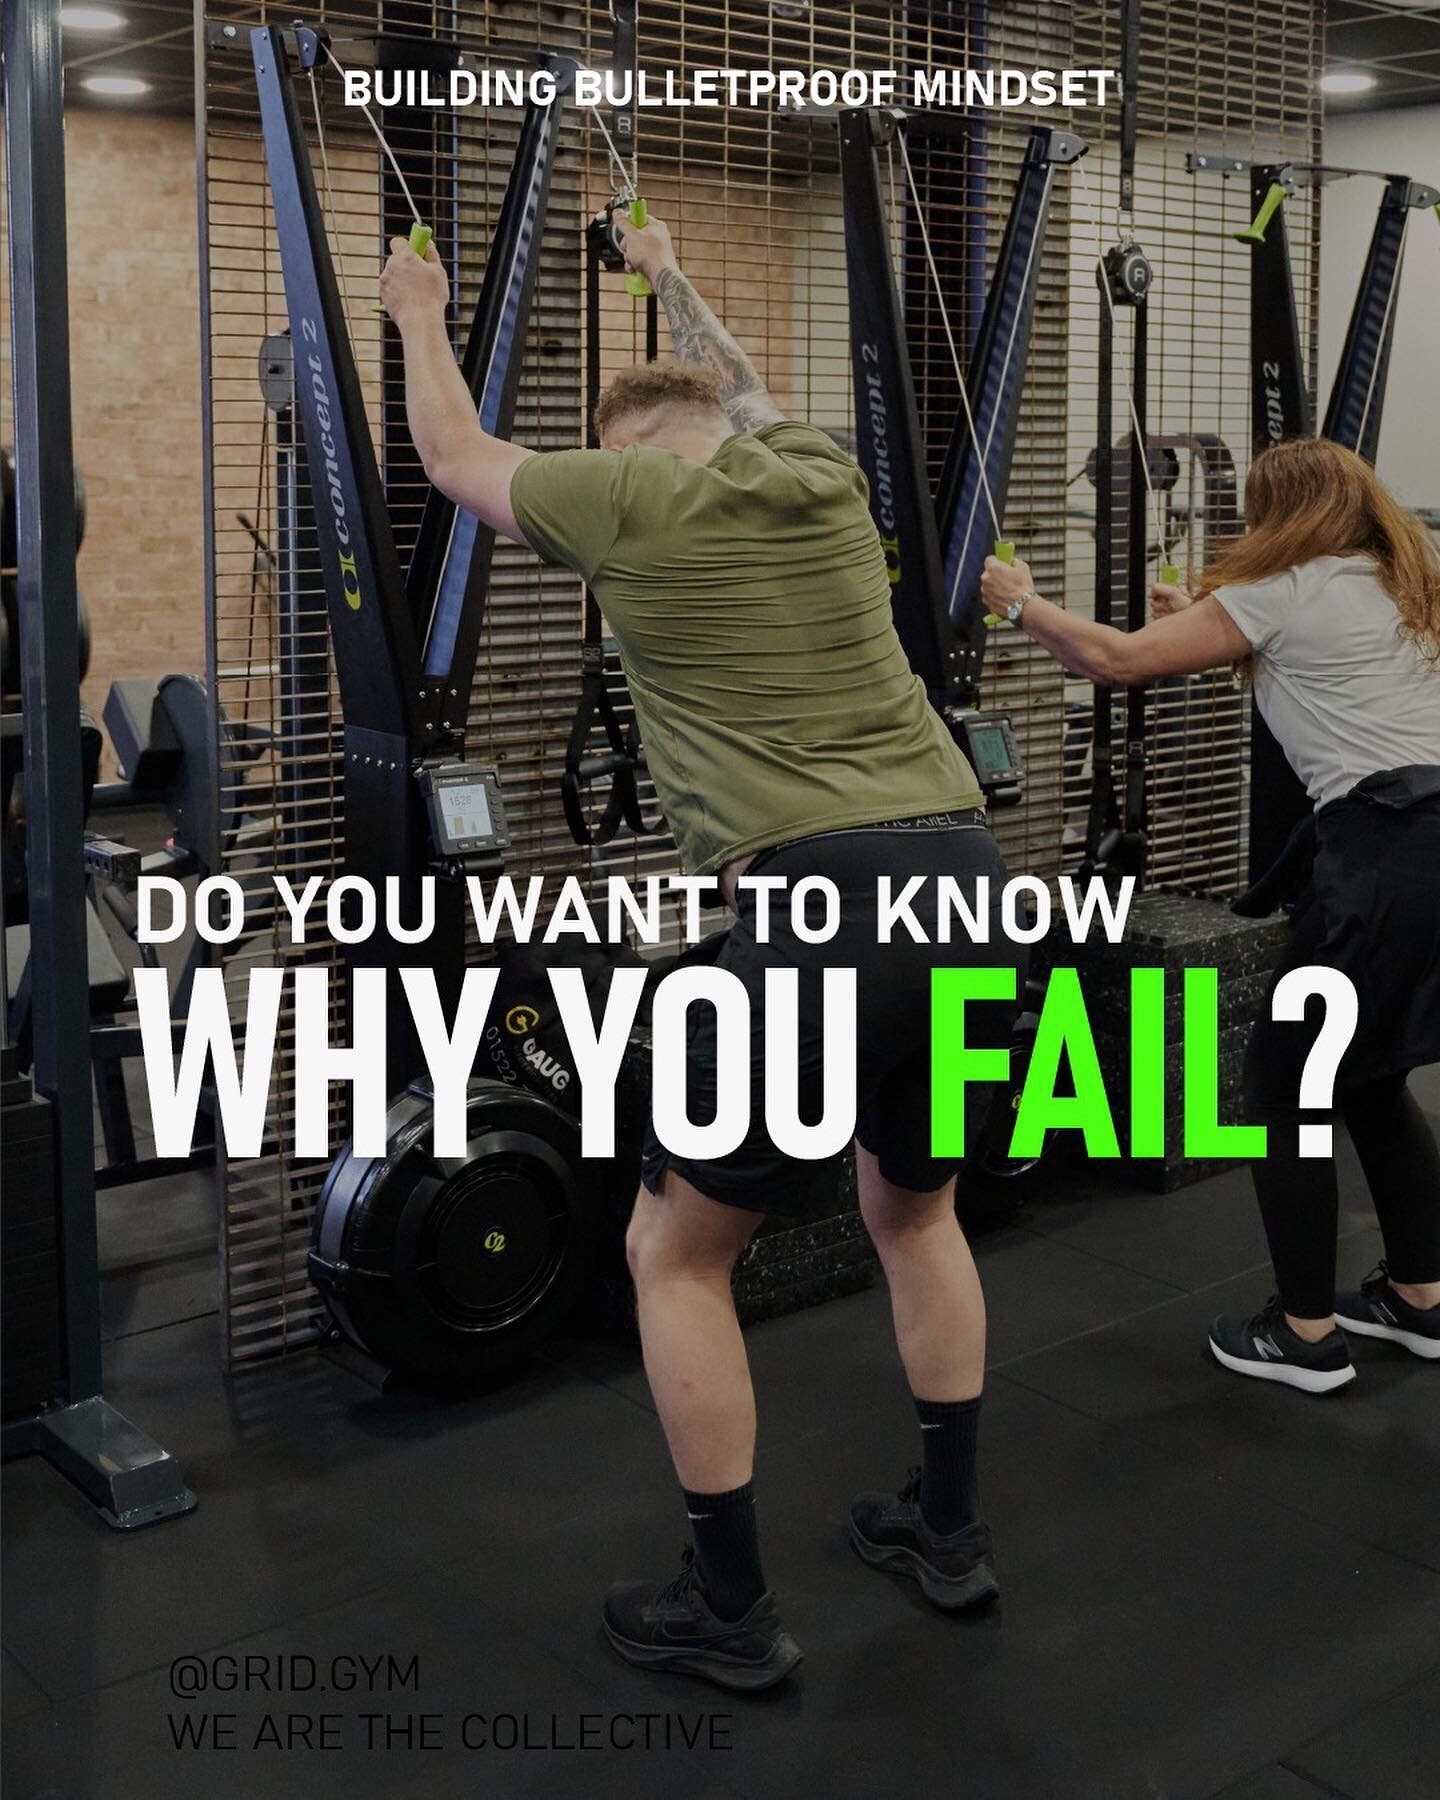 WANT TO KNOW WHY SO MANY FAIL?

We've all been there.

the funny thing is, all it takes is a subtle change in perspective.

Stop going all in.

You heard us right - but hear us out.

You fail because you do too much, too soon.

sustainable results ar